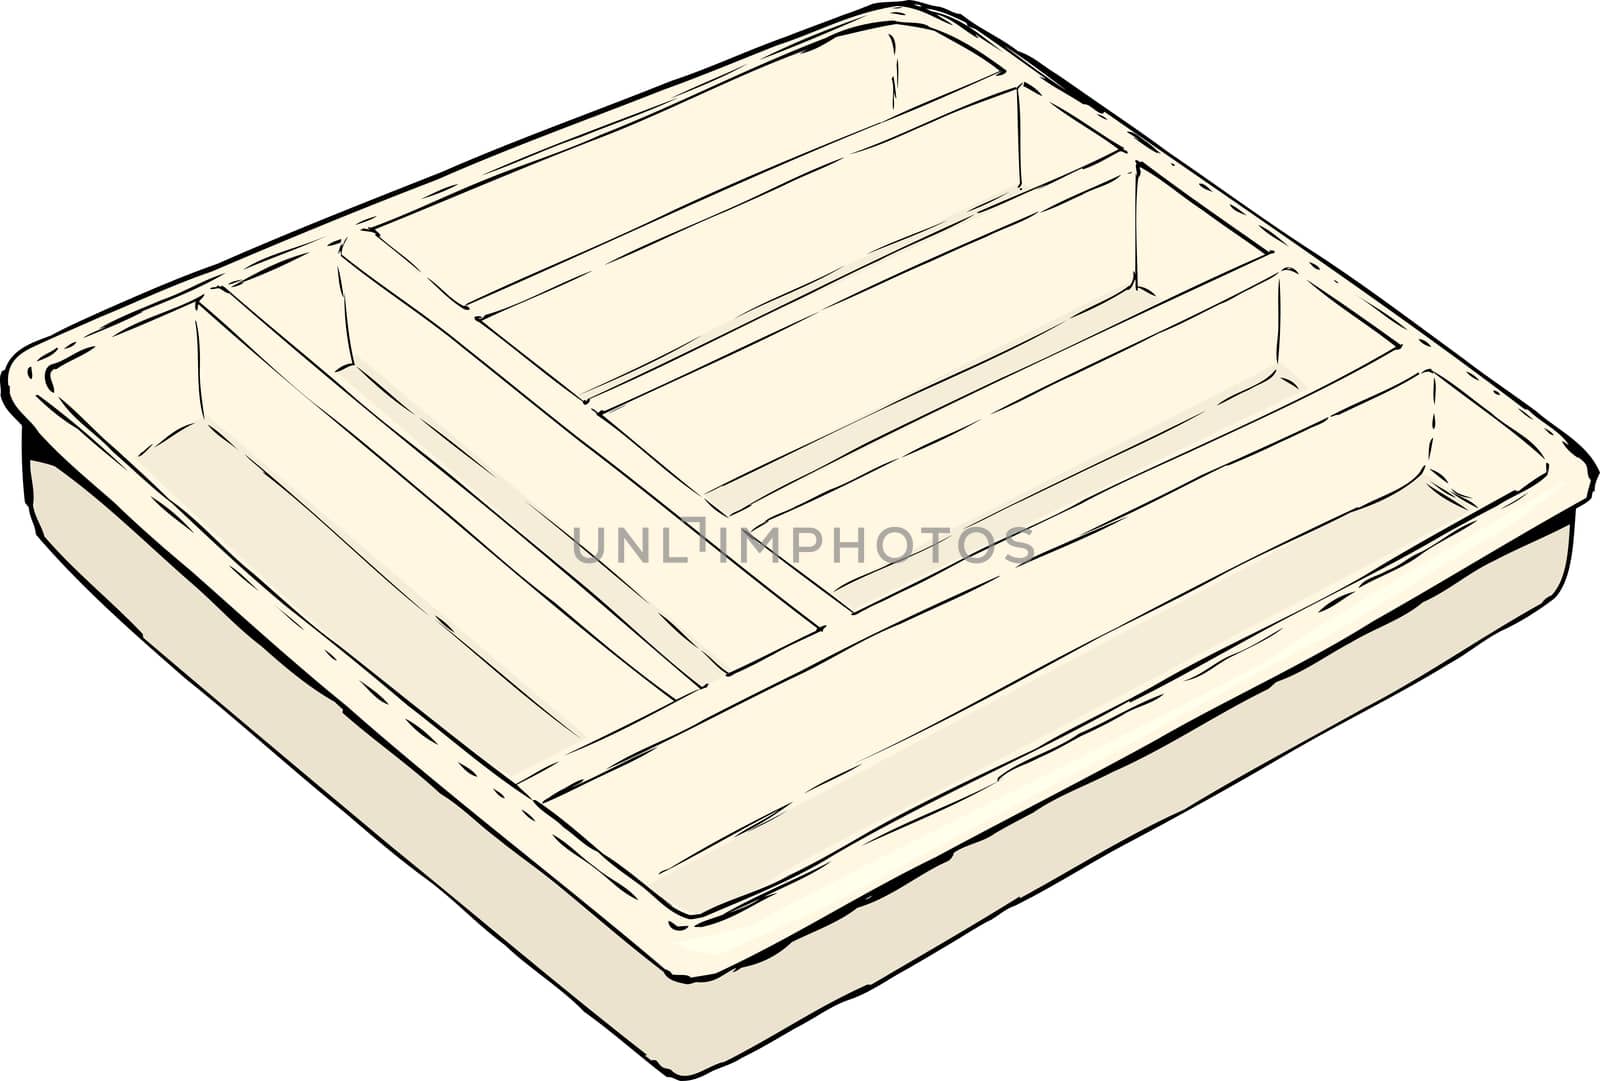 Single isolated rectangular empty cutlery tray used for storing eating utensils